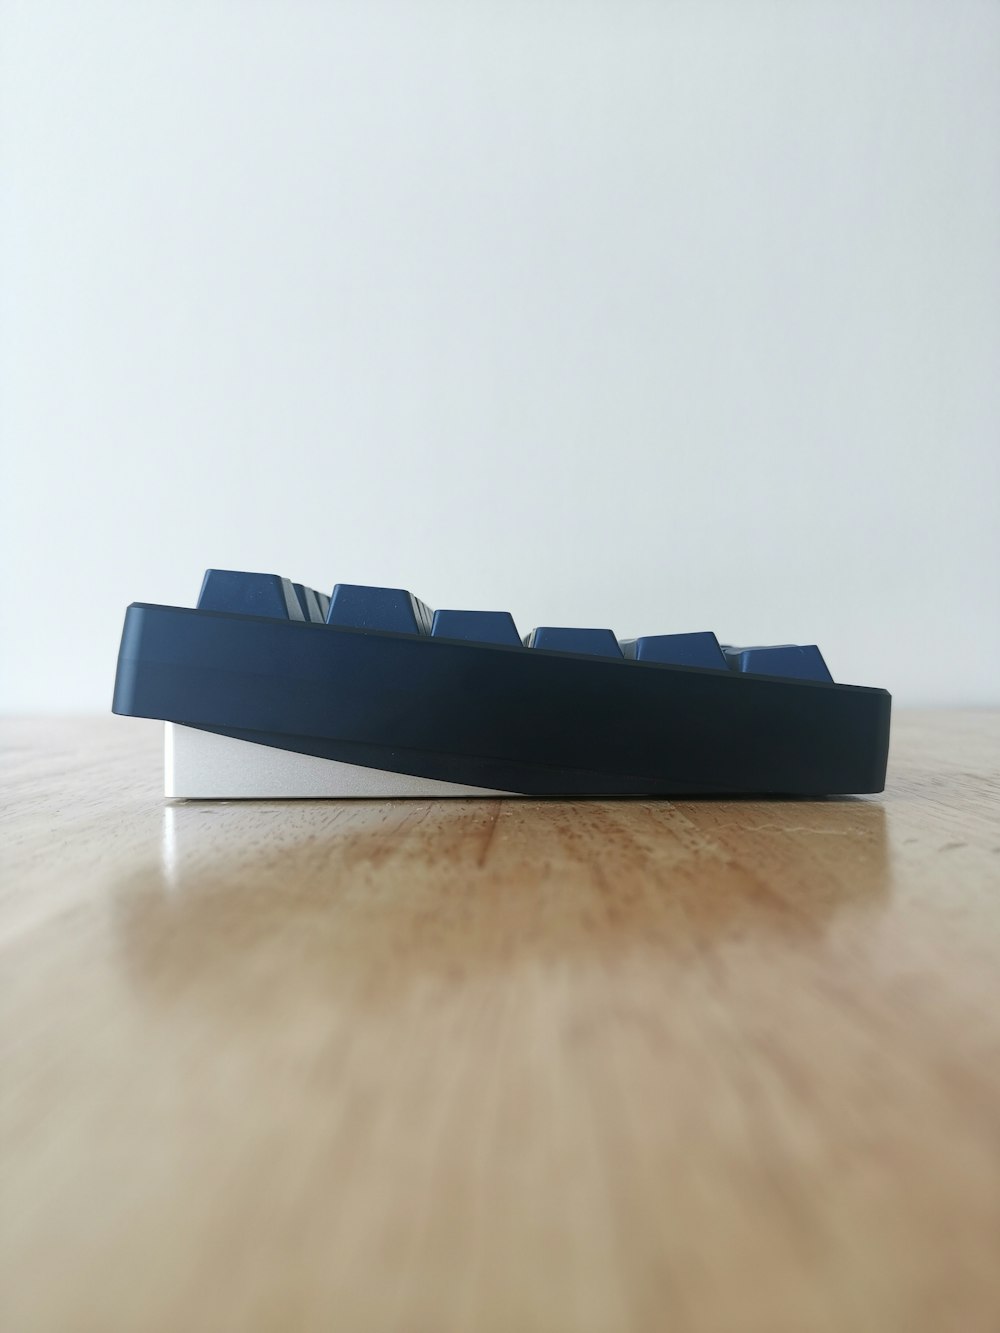 a wooden table topped with a blue and white shelf